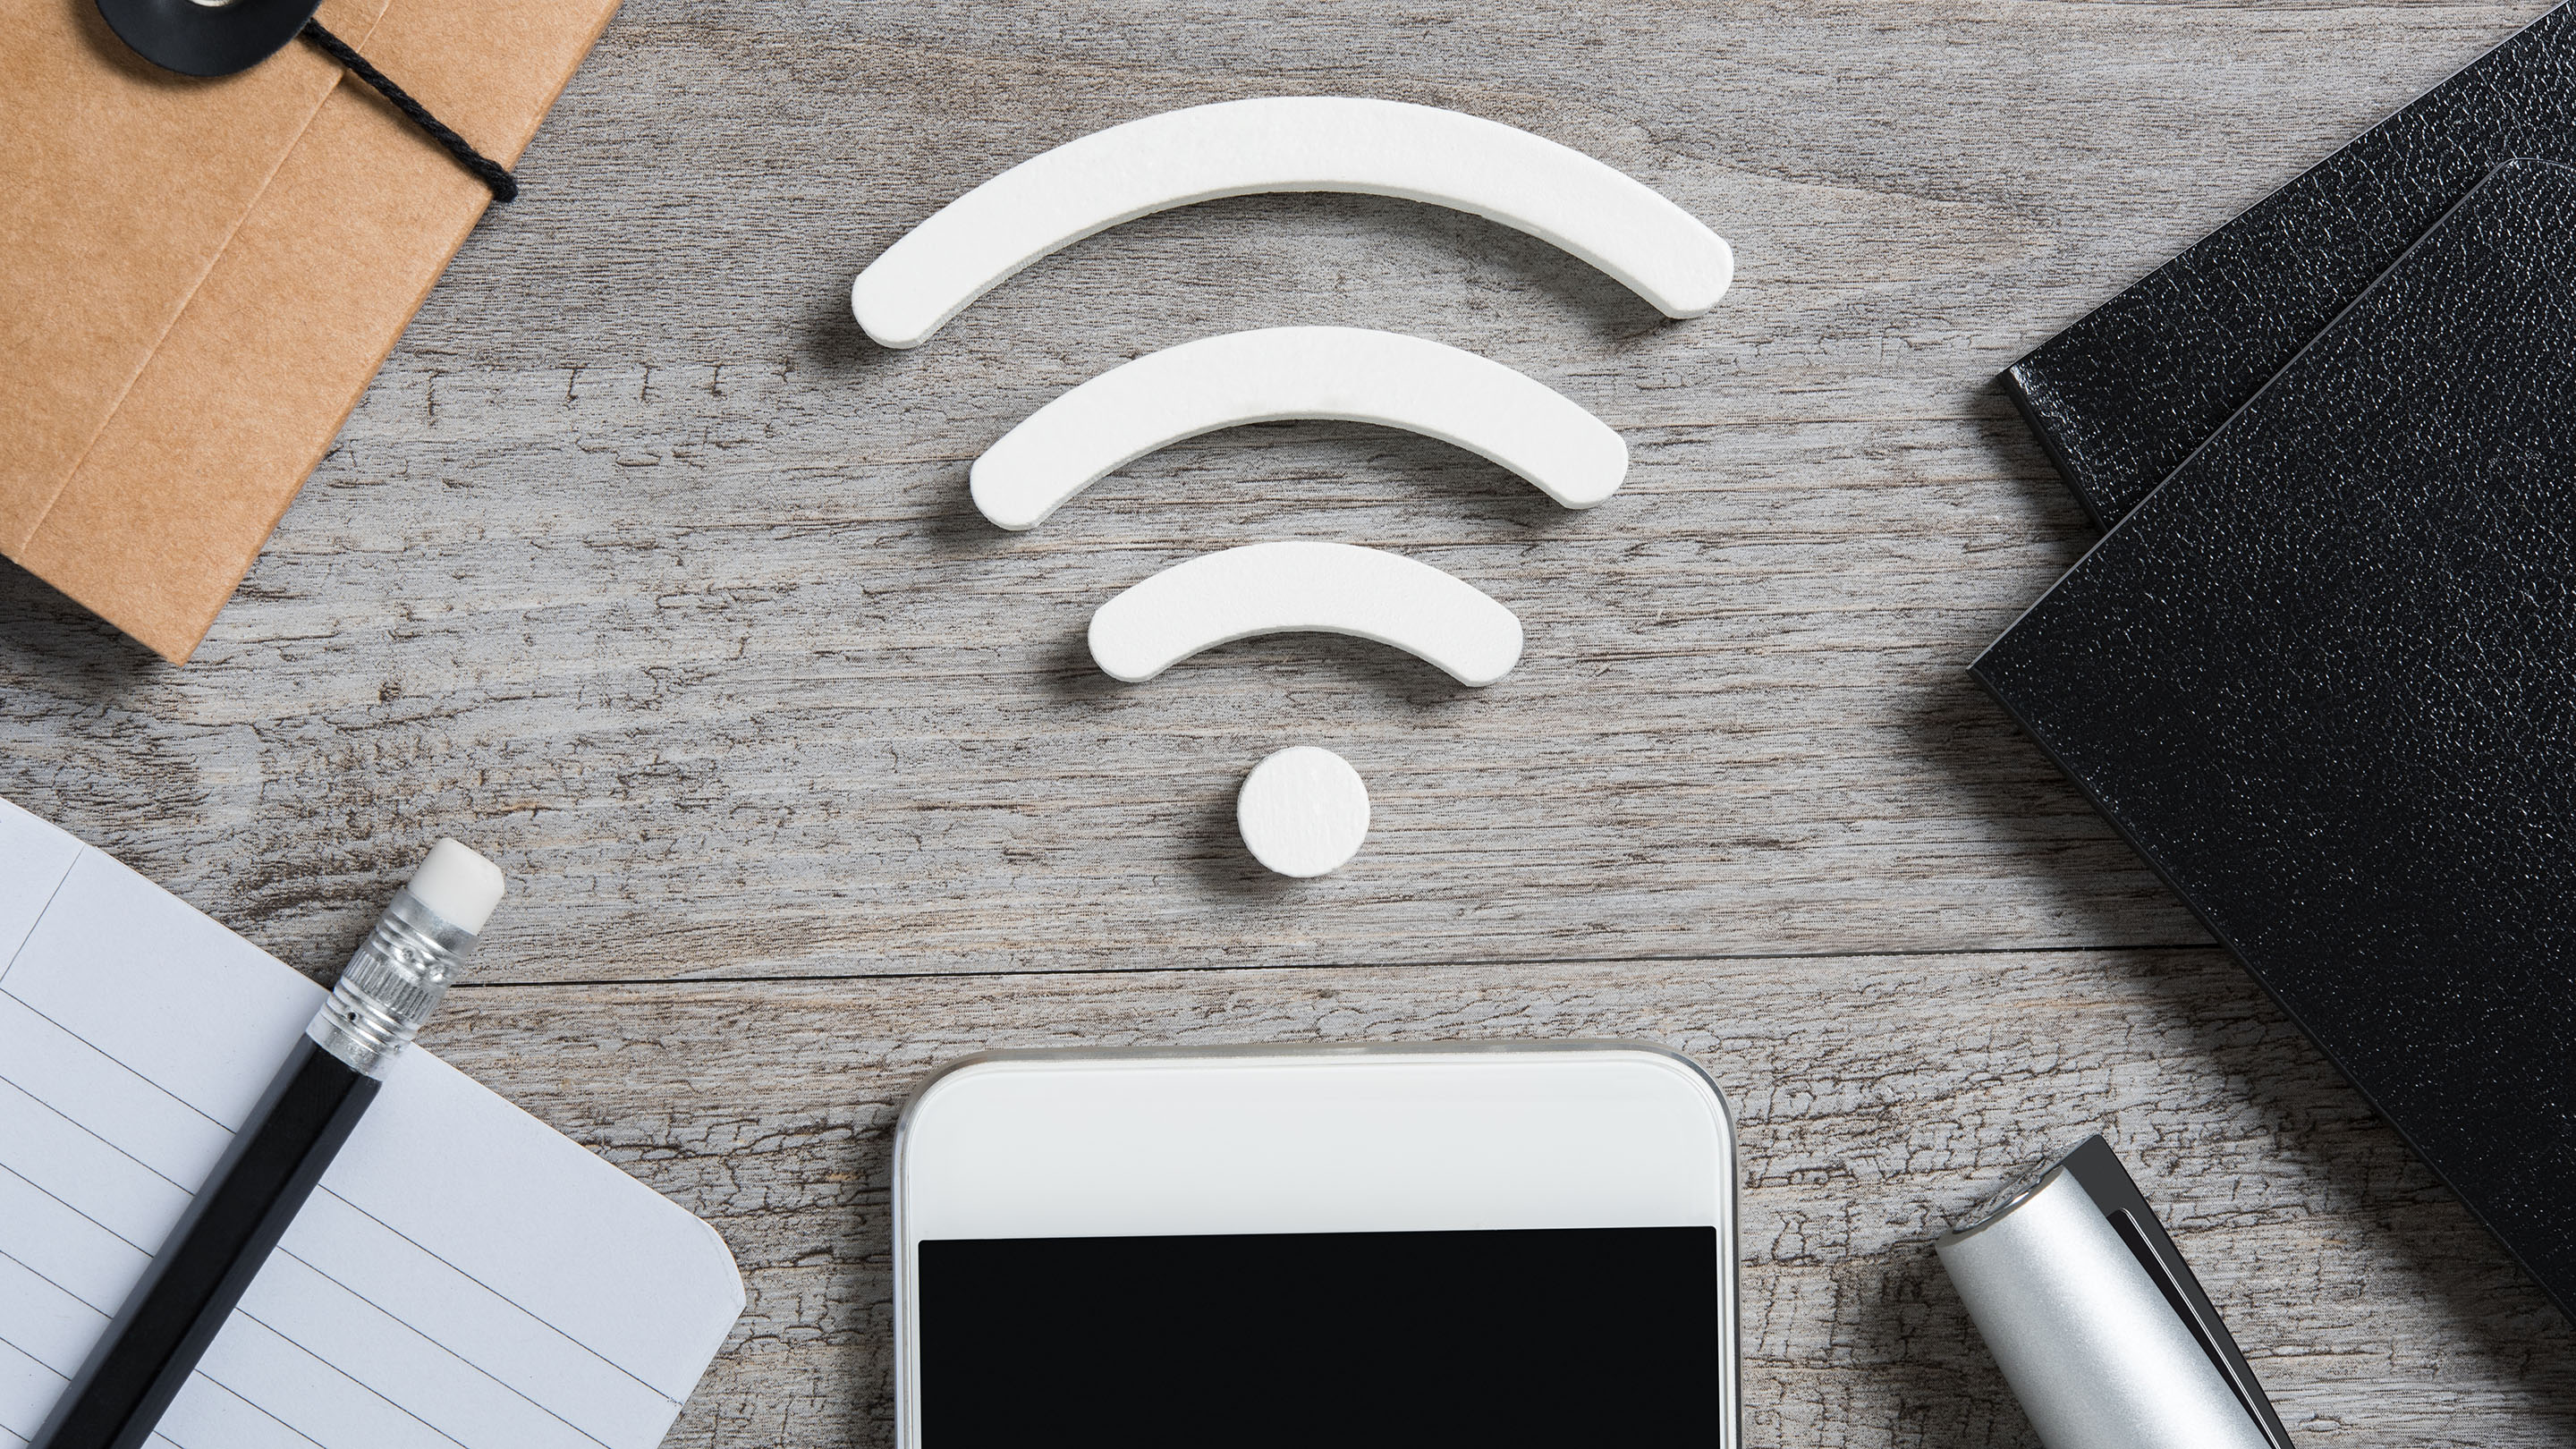 Make sure your device is connected to a stable and reliable network.
If using Wi-Fi, ensure that the signal strength is strong and stable.